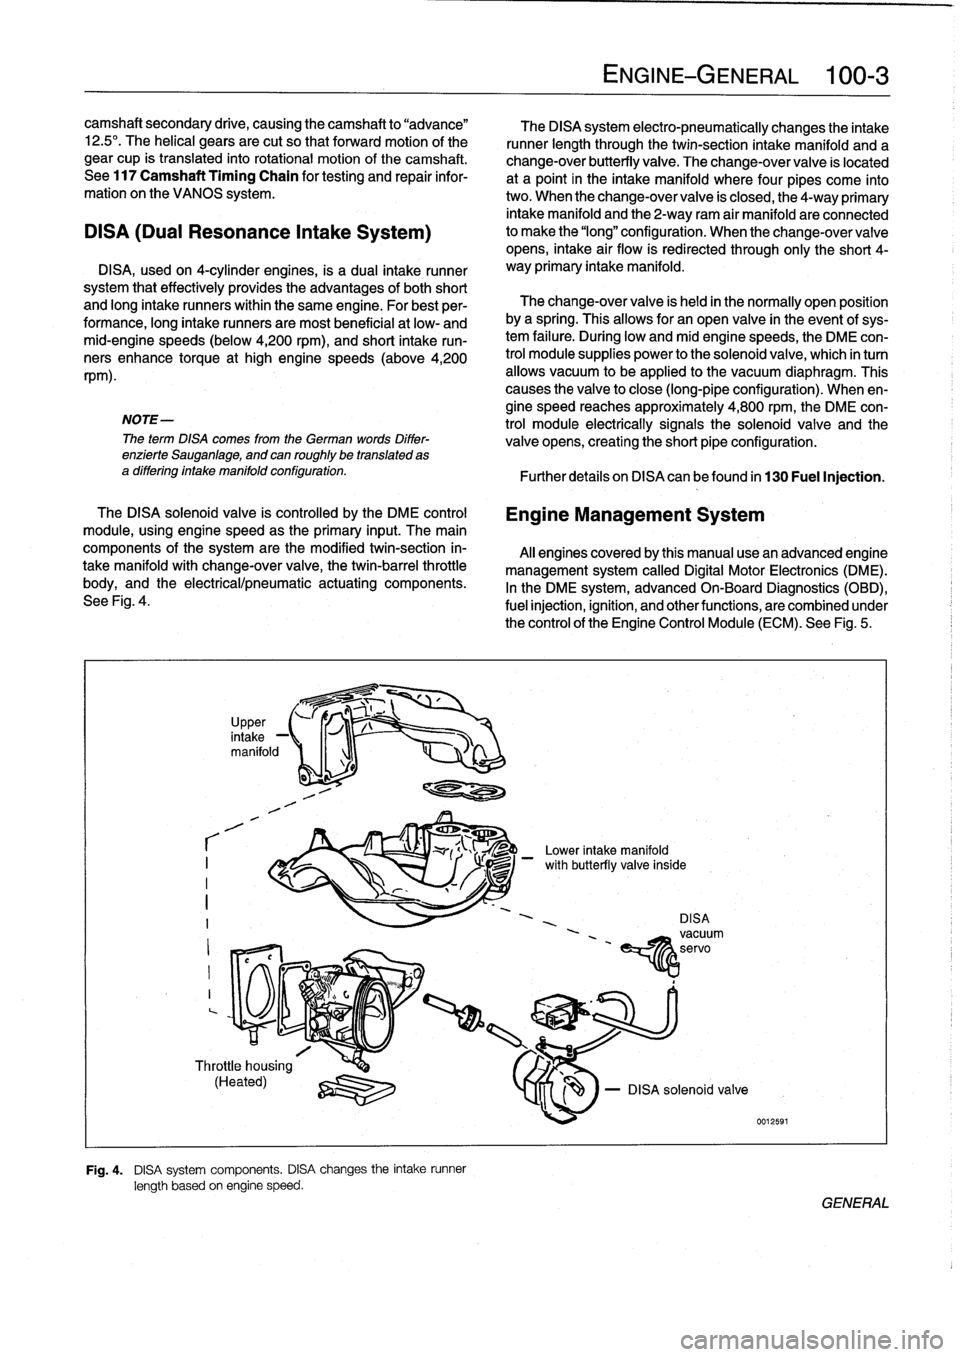 BMW 328i 1995 E36 Workshop Manual camshaft
secondary
drive,
causing
thecamshaft
to
"advance"

12
.5°
.
The
helical
gears
are
cut
so
that
forward
motion
of
the

gear
cup
is
transiated
into
rotational
motion
of
the
camshaft
.

See
117
